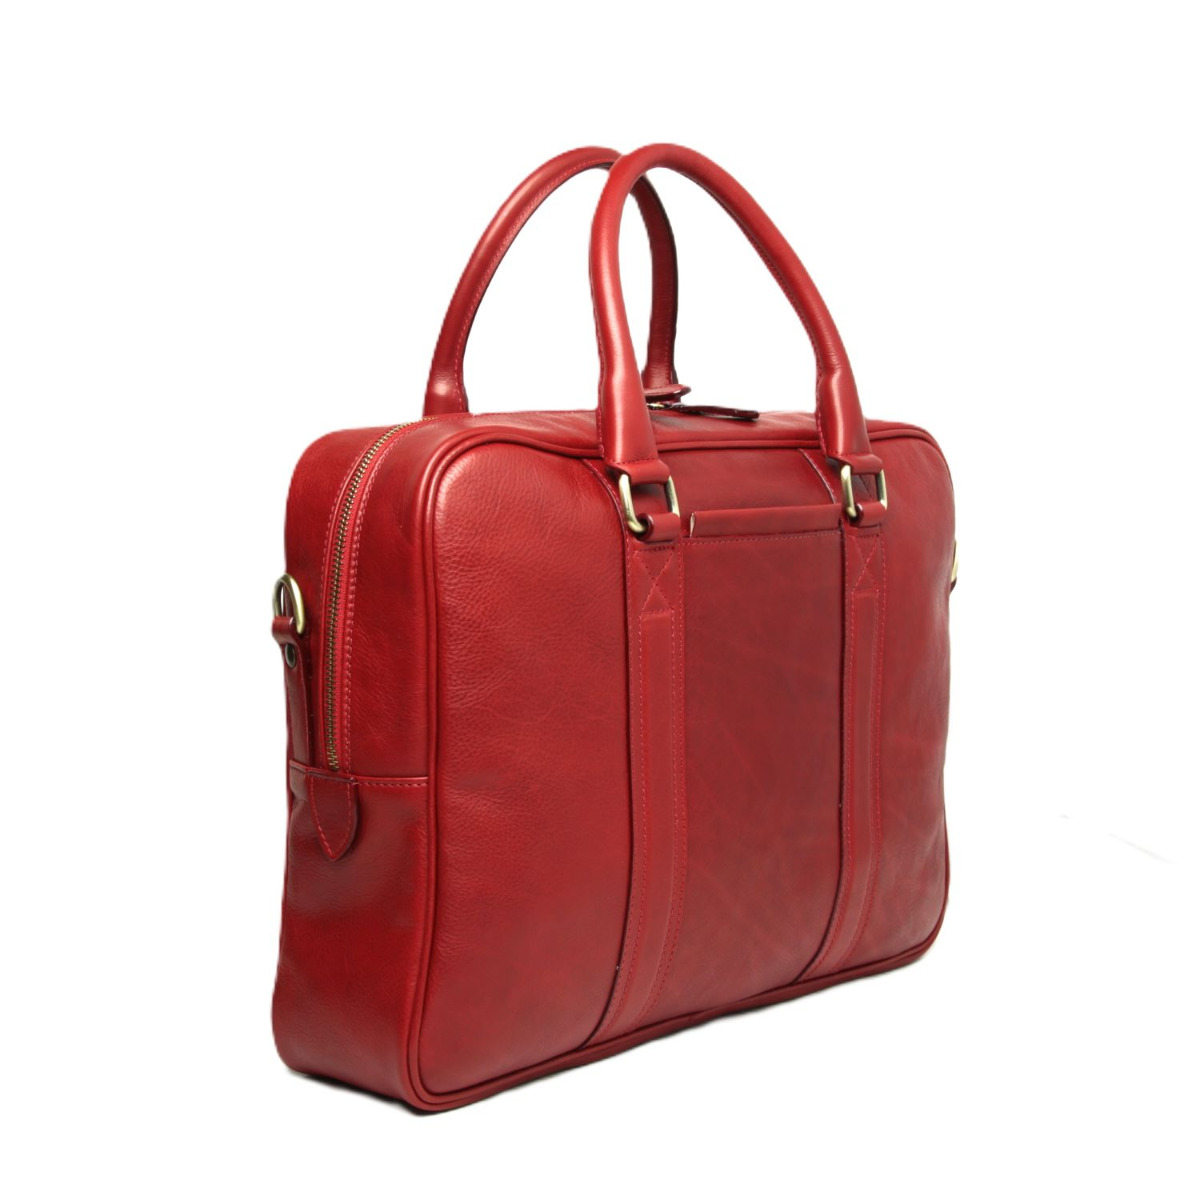 Soft calfskin leather briefcase - red|030191RO|Old Angler Firenze